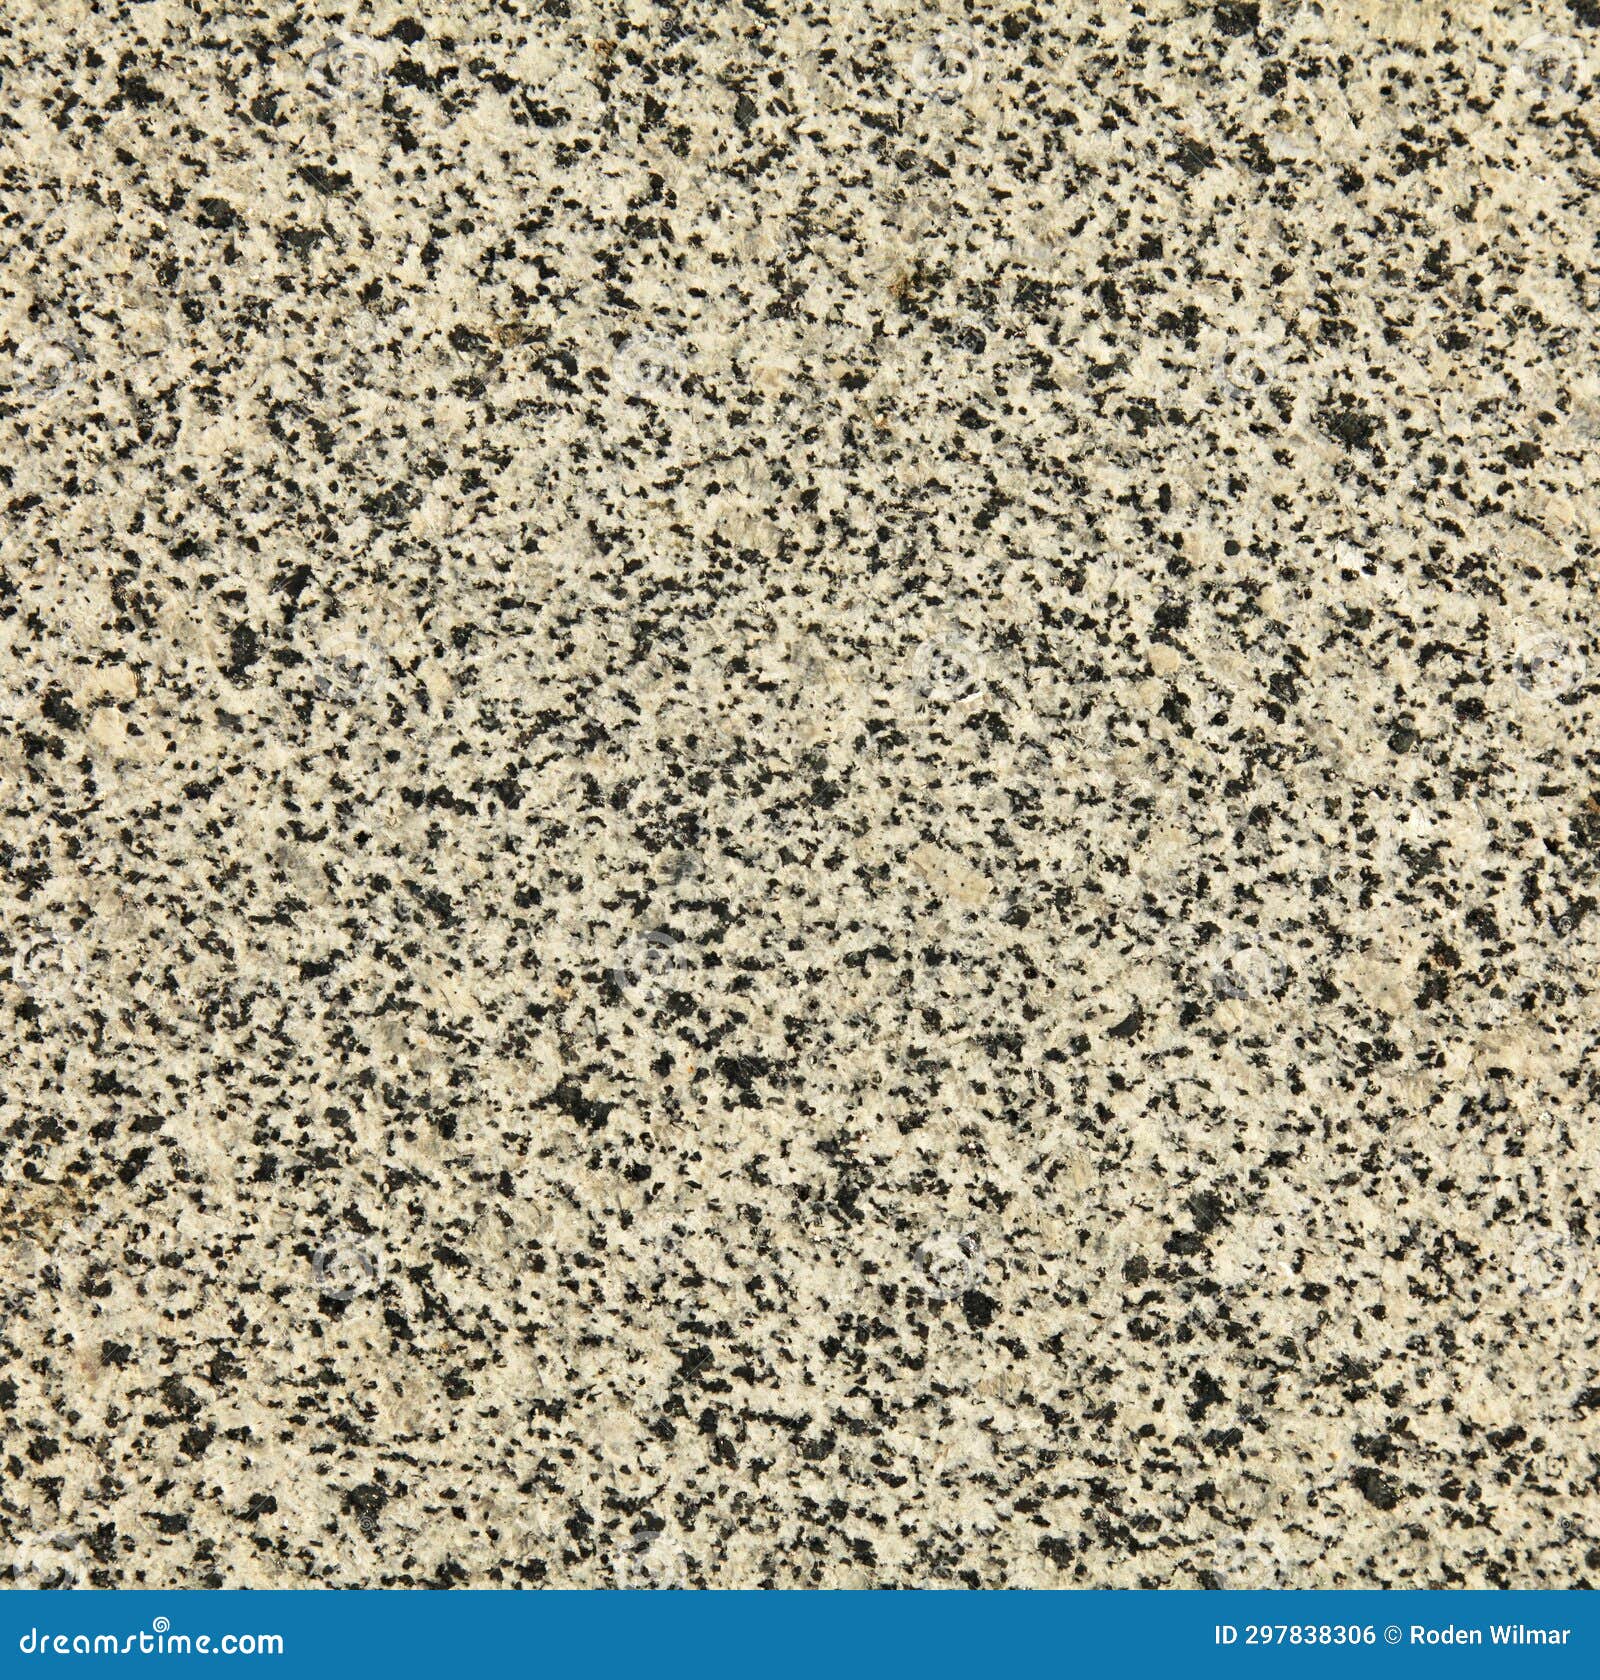 grey, spotted granite, texture, backdrop. a variegated, spotted background of gray granite wall interspersed with black